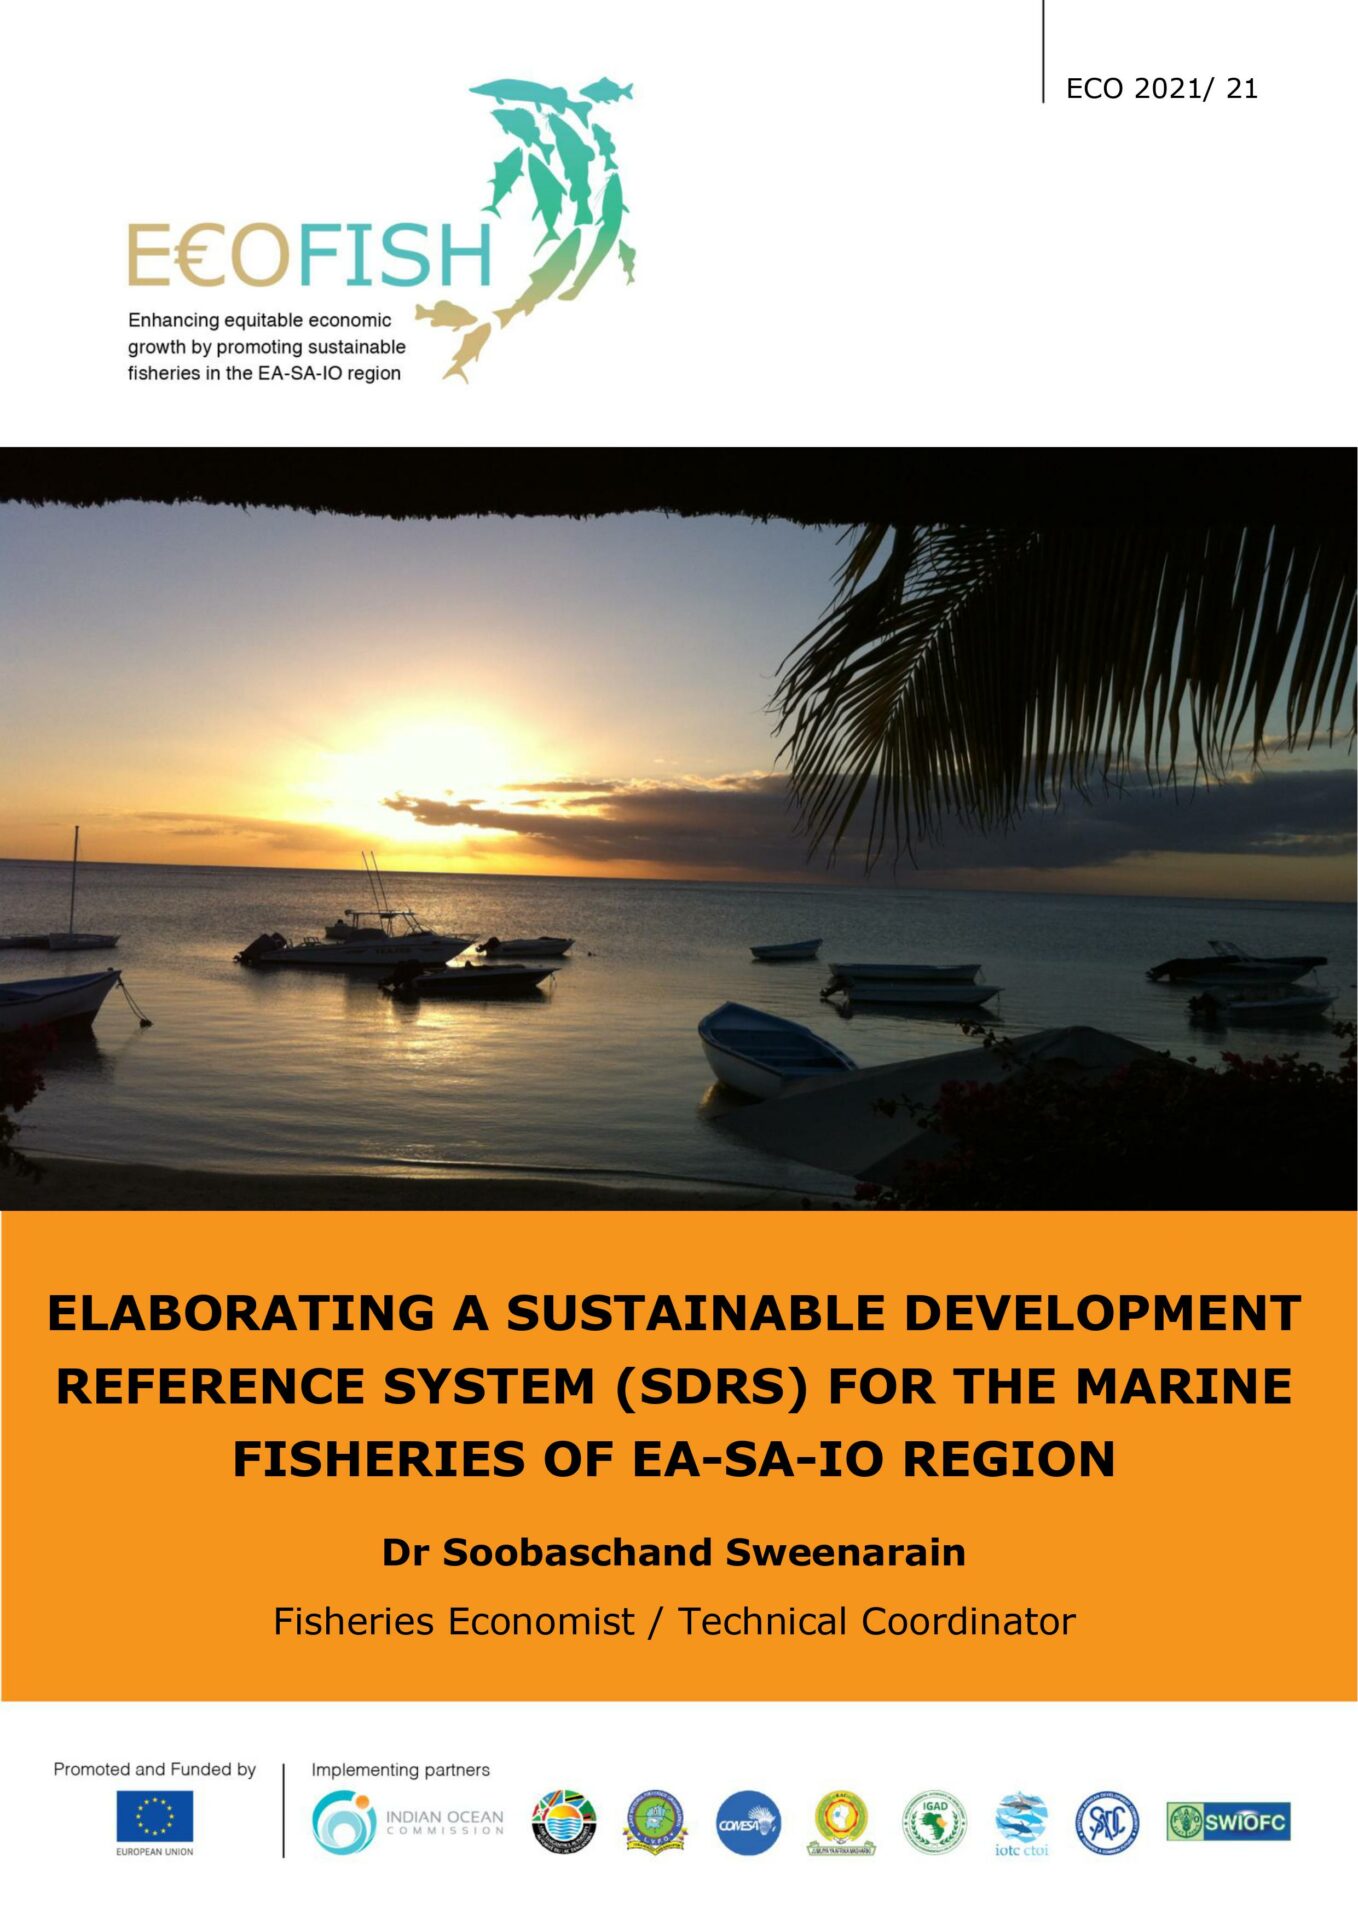 ELABORATING A SUSTAINABLE DEVELOPMENT REFERENCE SYSTEM (SDRS) FOR THE MARINE FISHERIES OF EA-SA-IO REGION